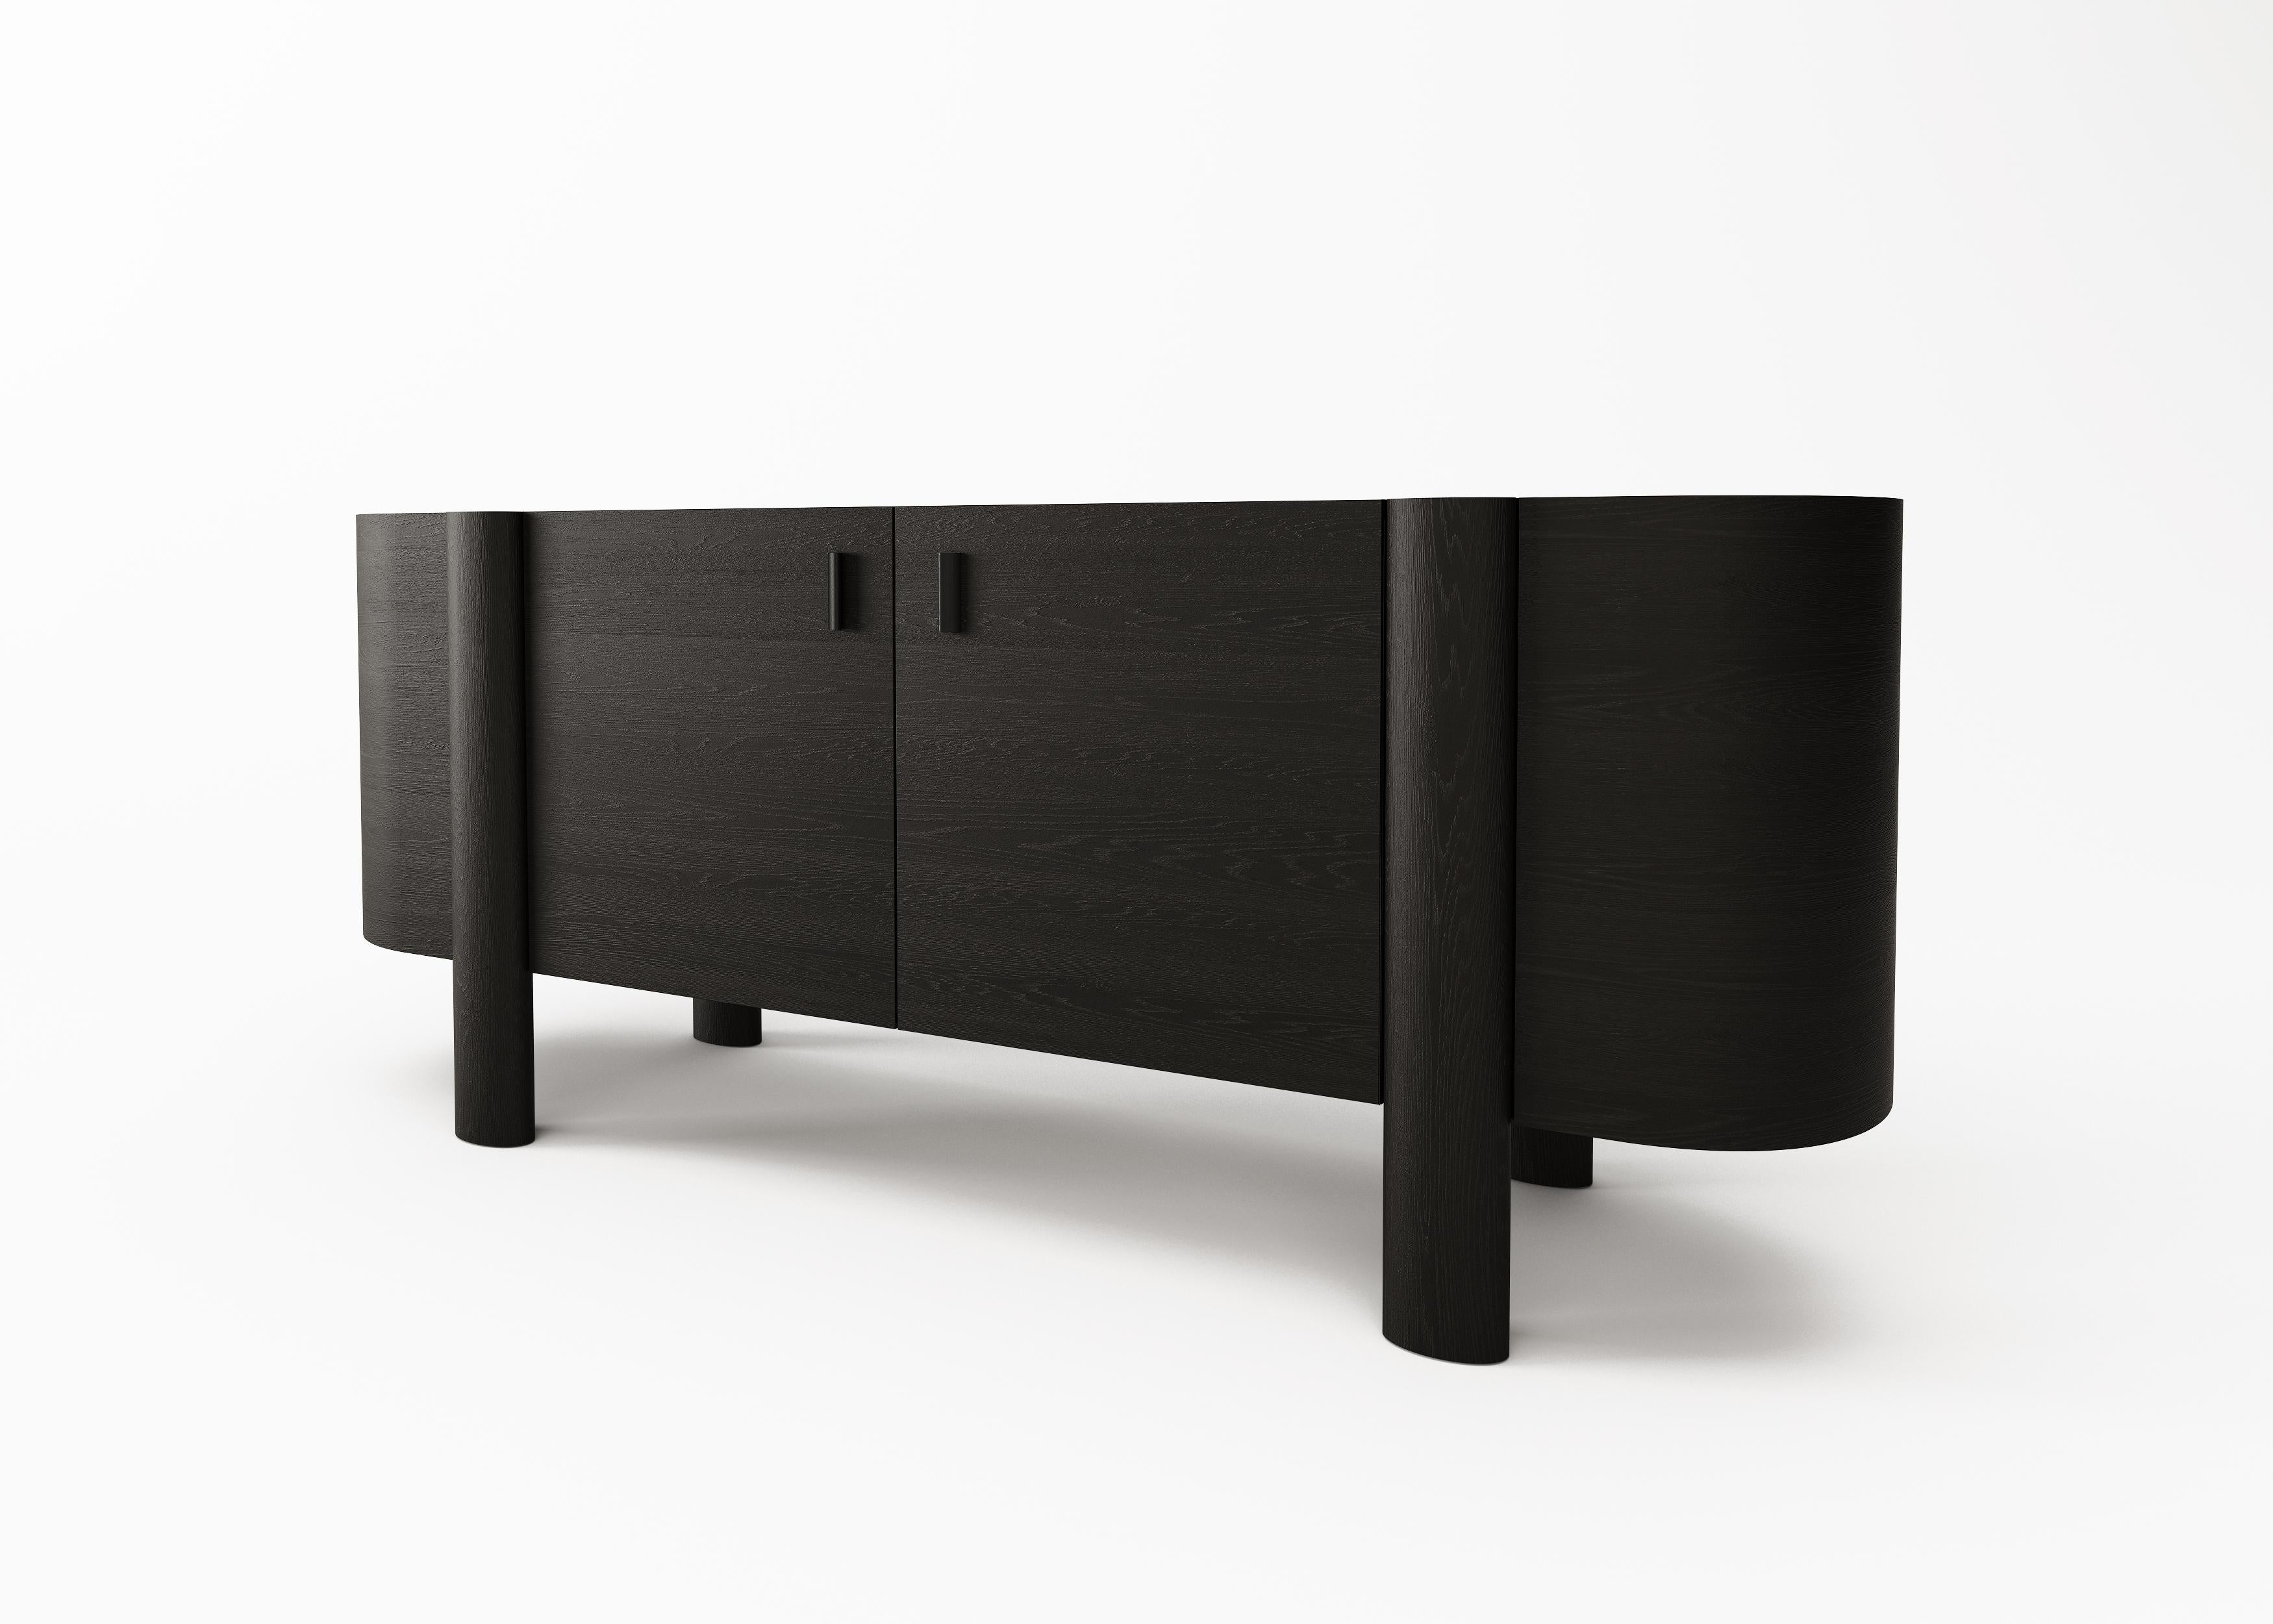 Era Oak Credenza Signed by Buket Hos¸can Bazman
Dimensions: 200 x 45 x 80 cm
Material: Blackened and sandblasted oak, patinated brass, copper inside back

Available in custom sizing and finishes.
Patina application varies in each